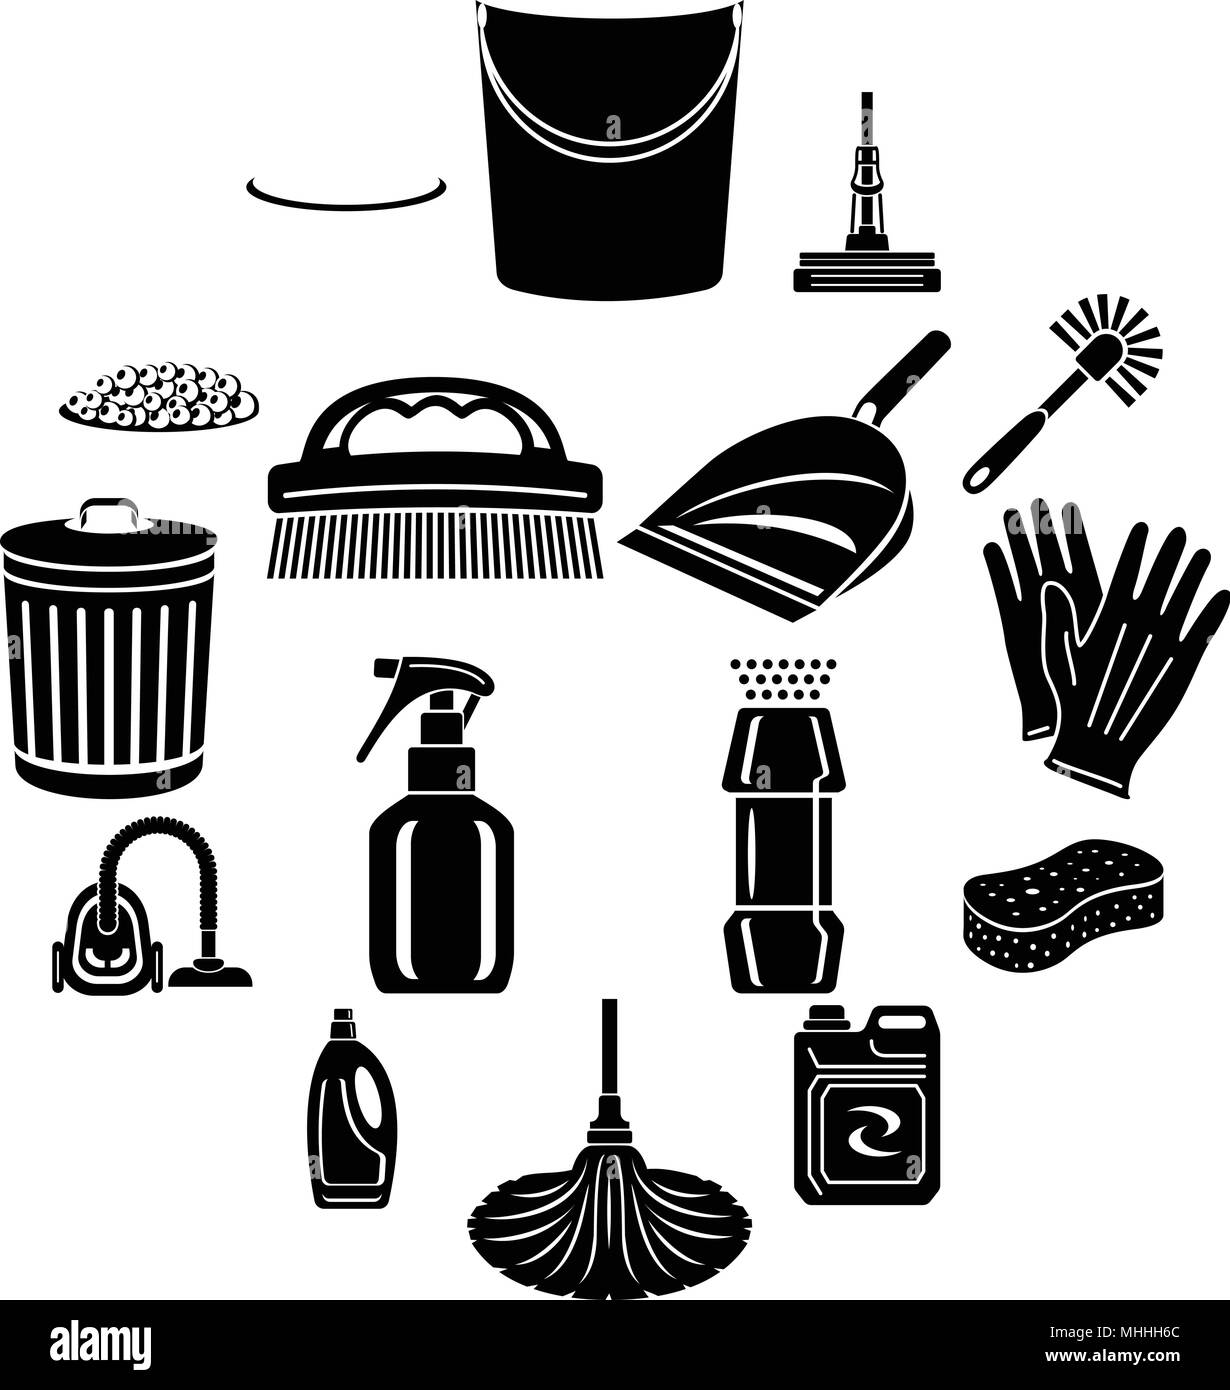 Cleaning icons set, simple style Stock Vector